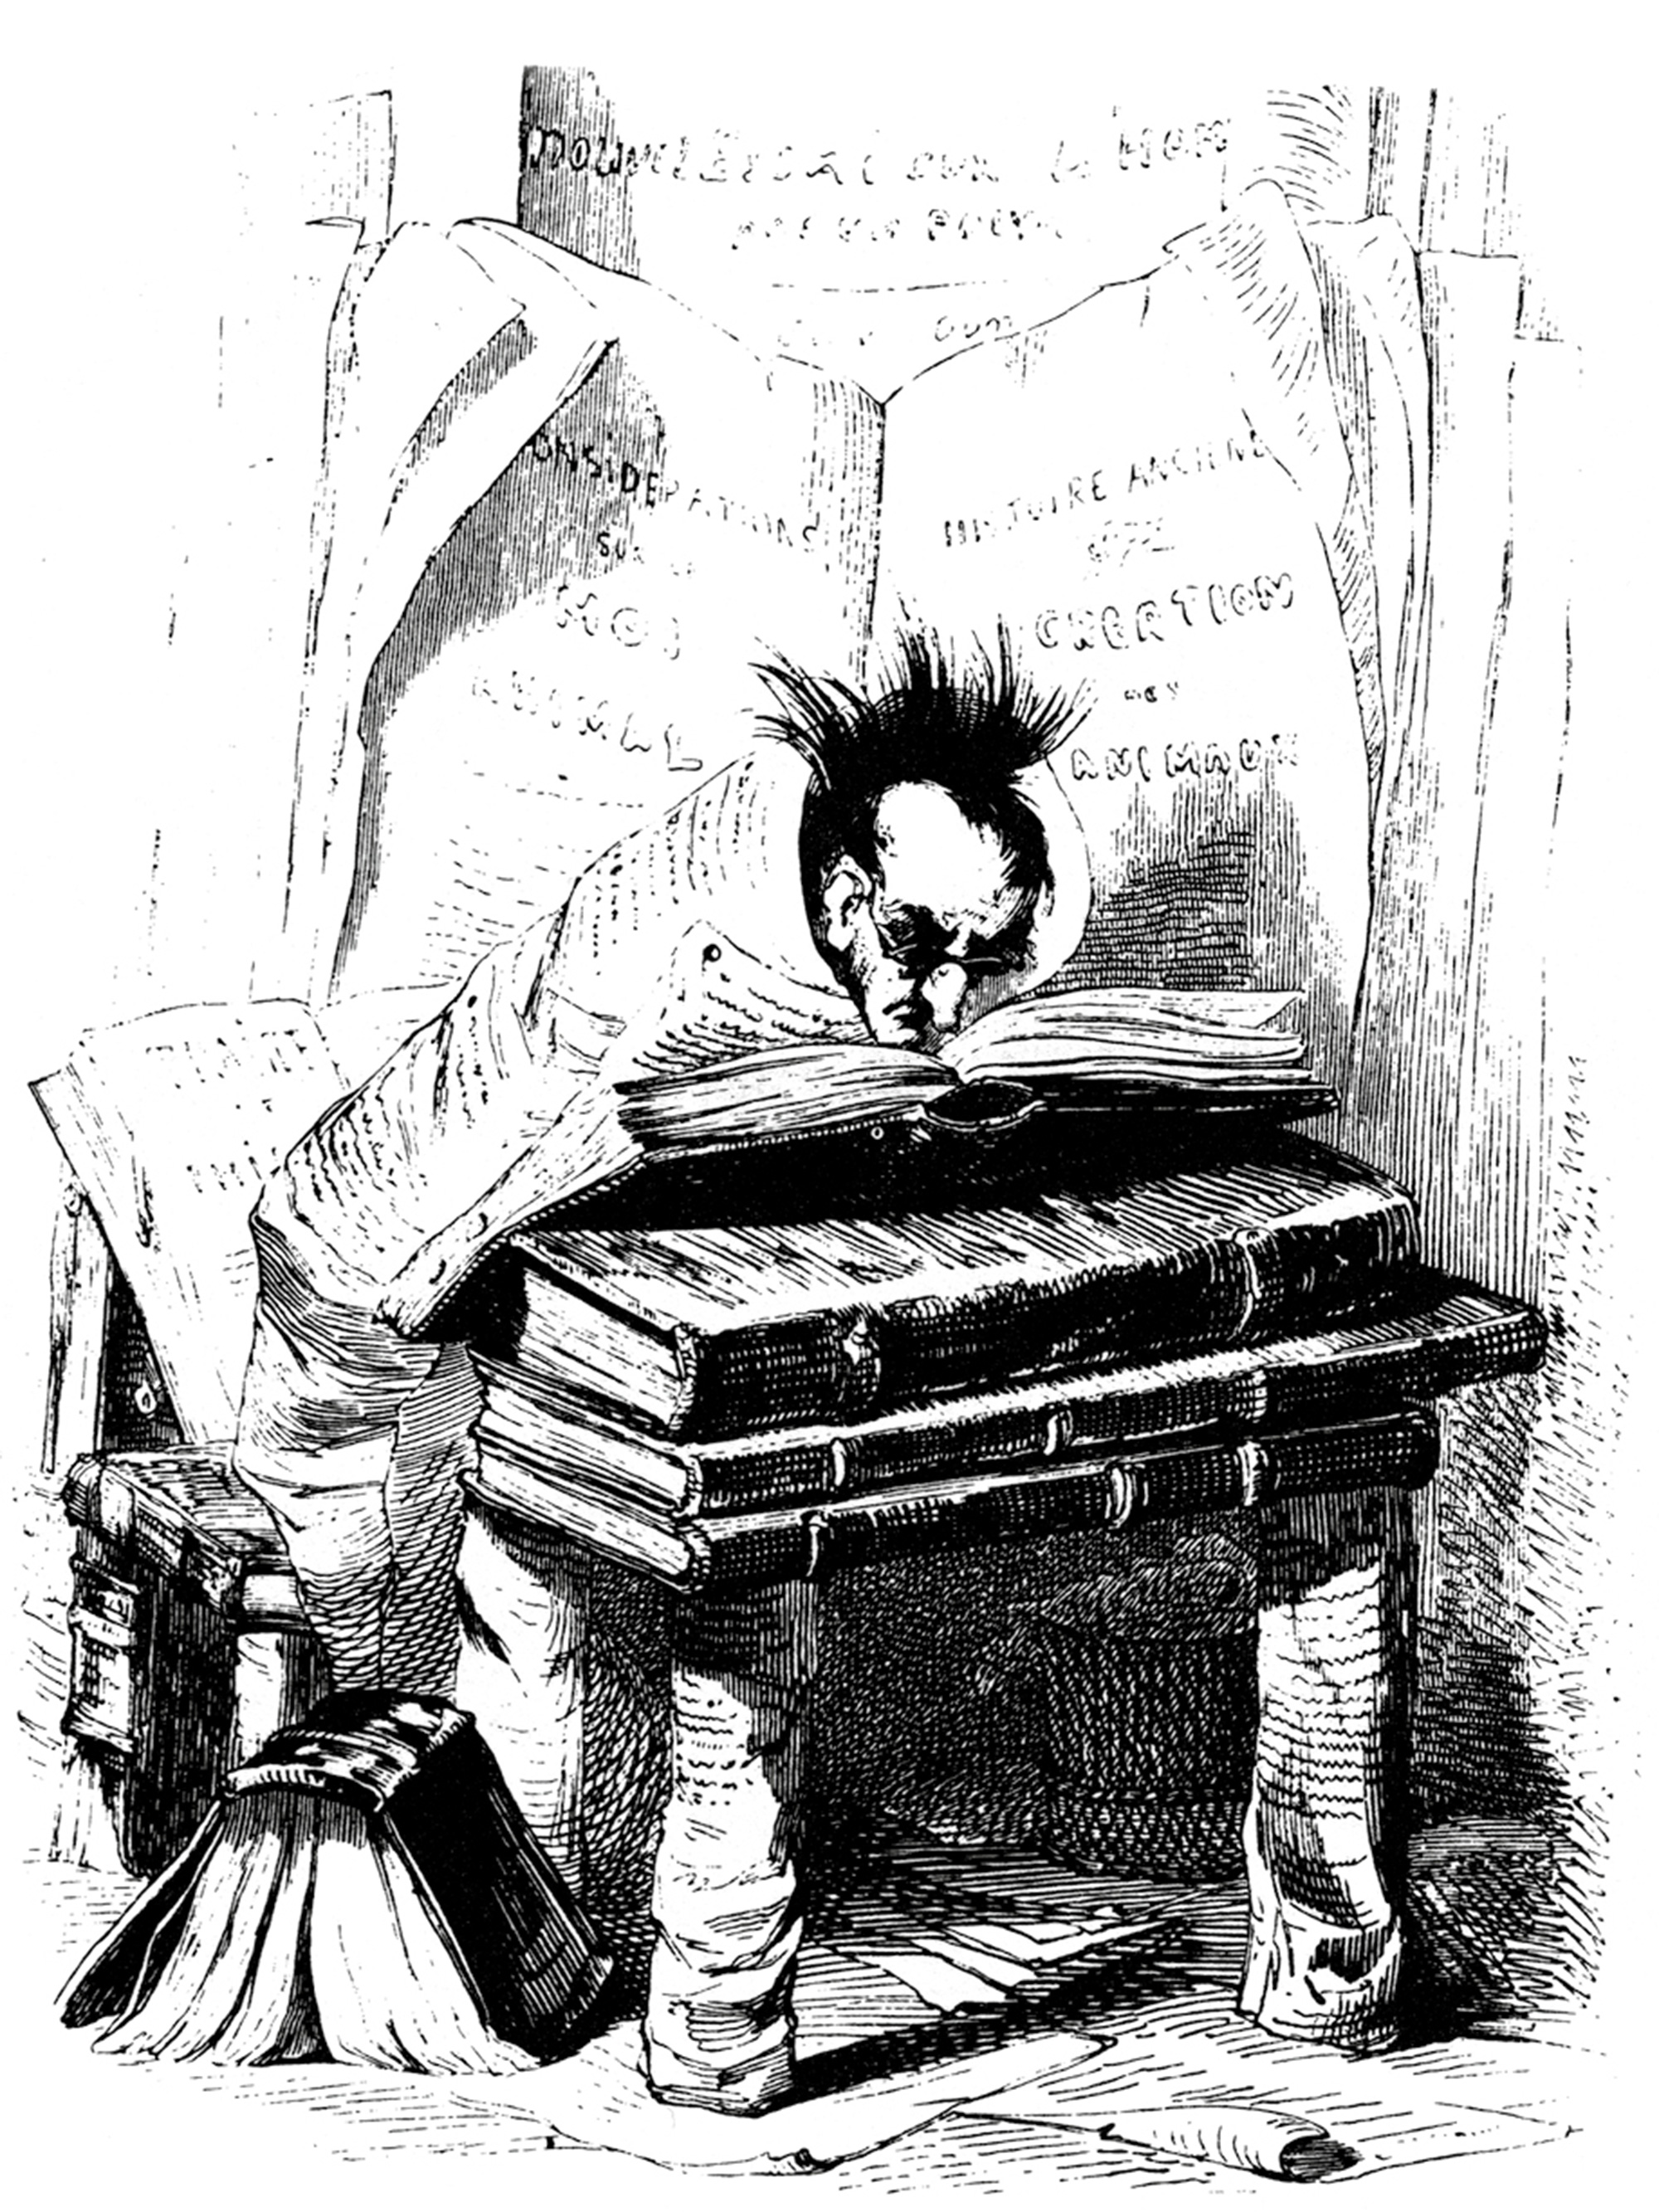 A modified version of a drawing by J. J. Grandville of a solipsist, reading oversized tomes with his body wrapped in printed pages. 